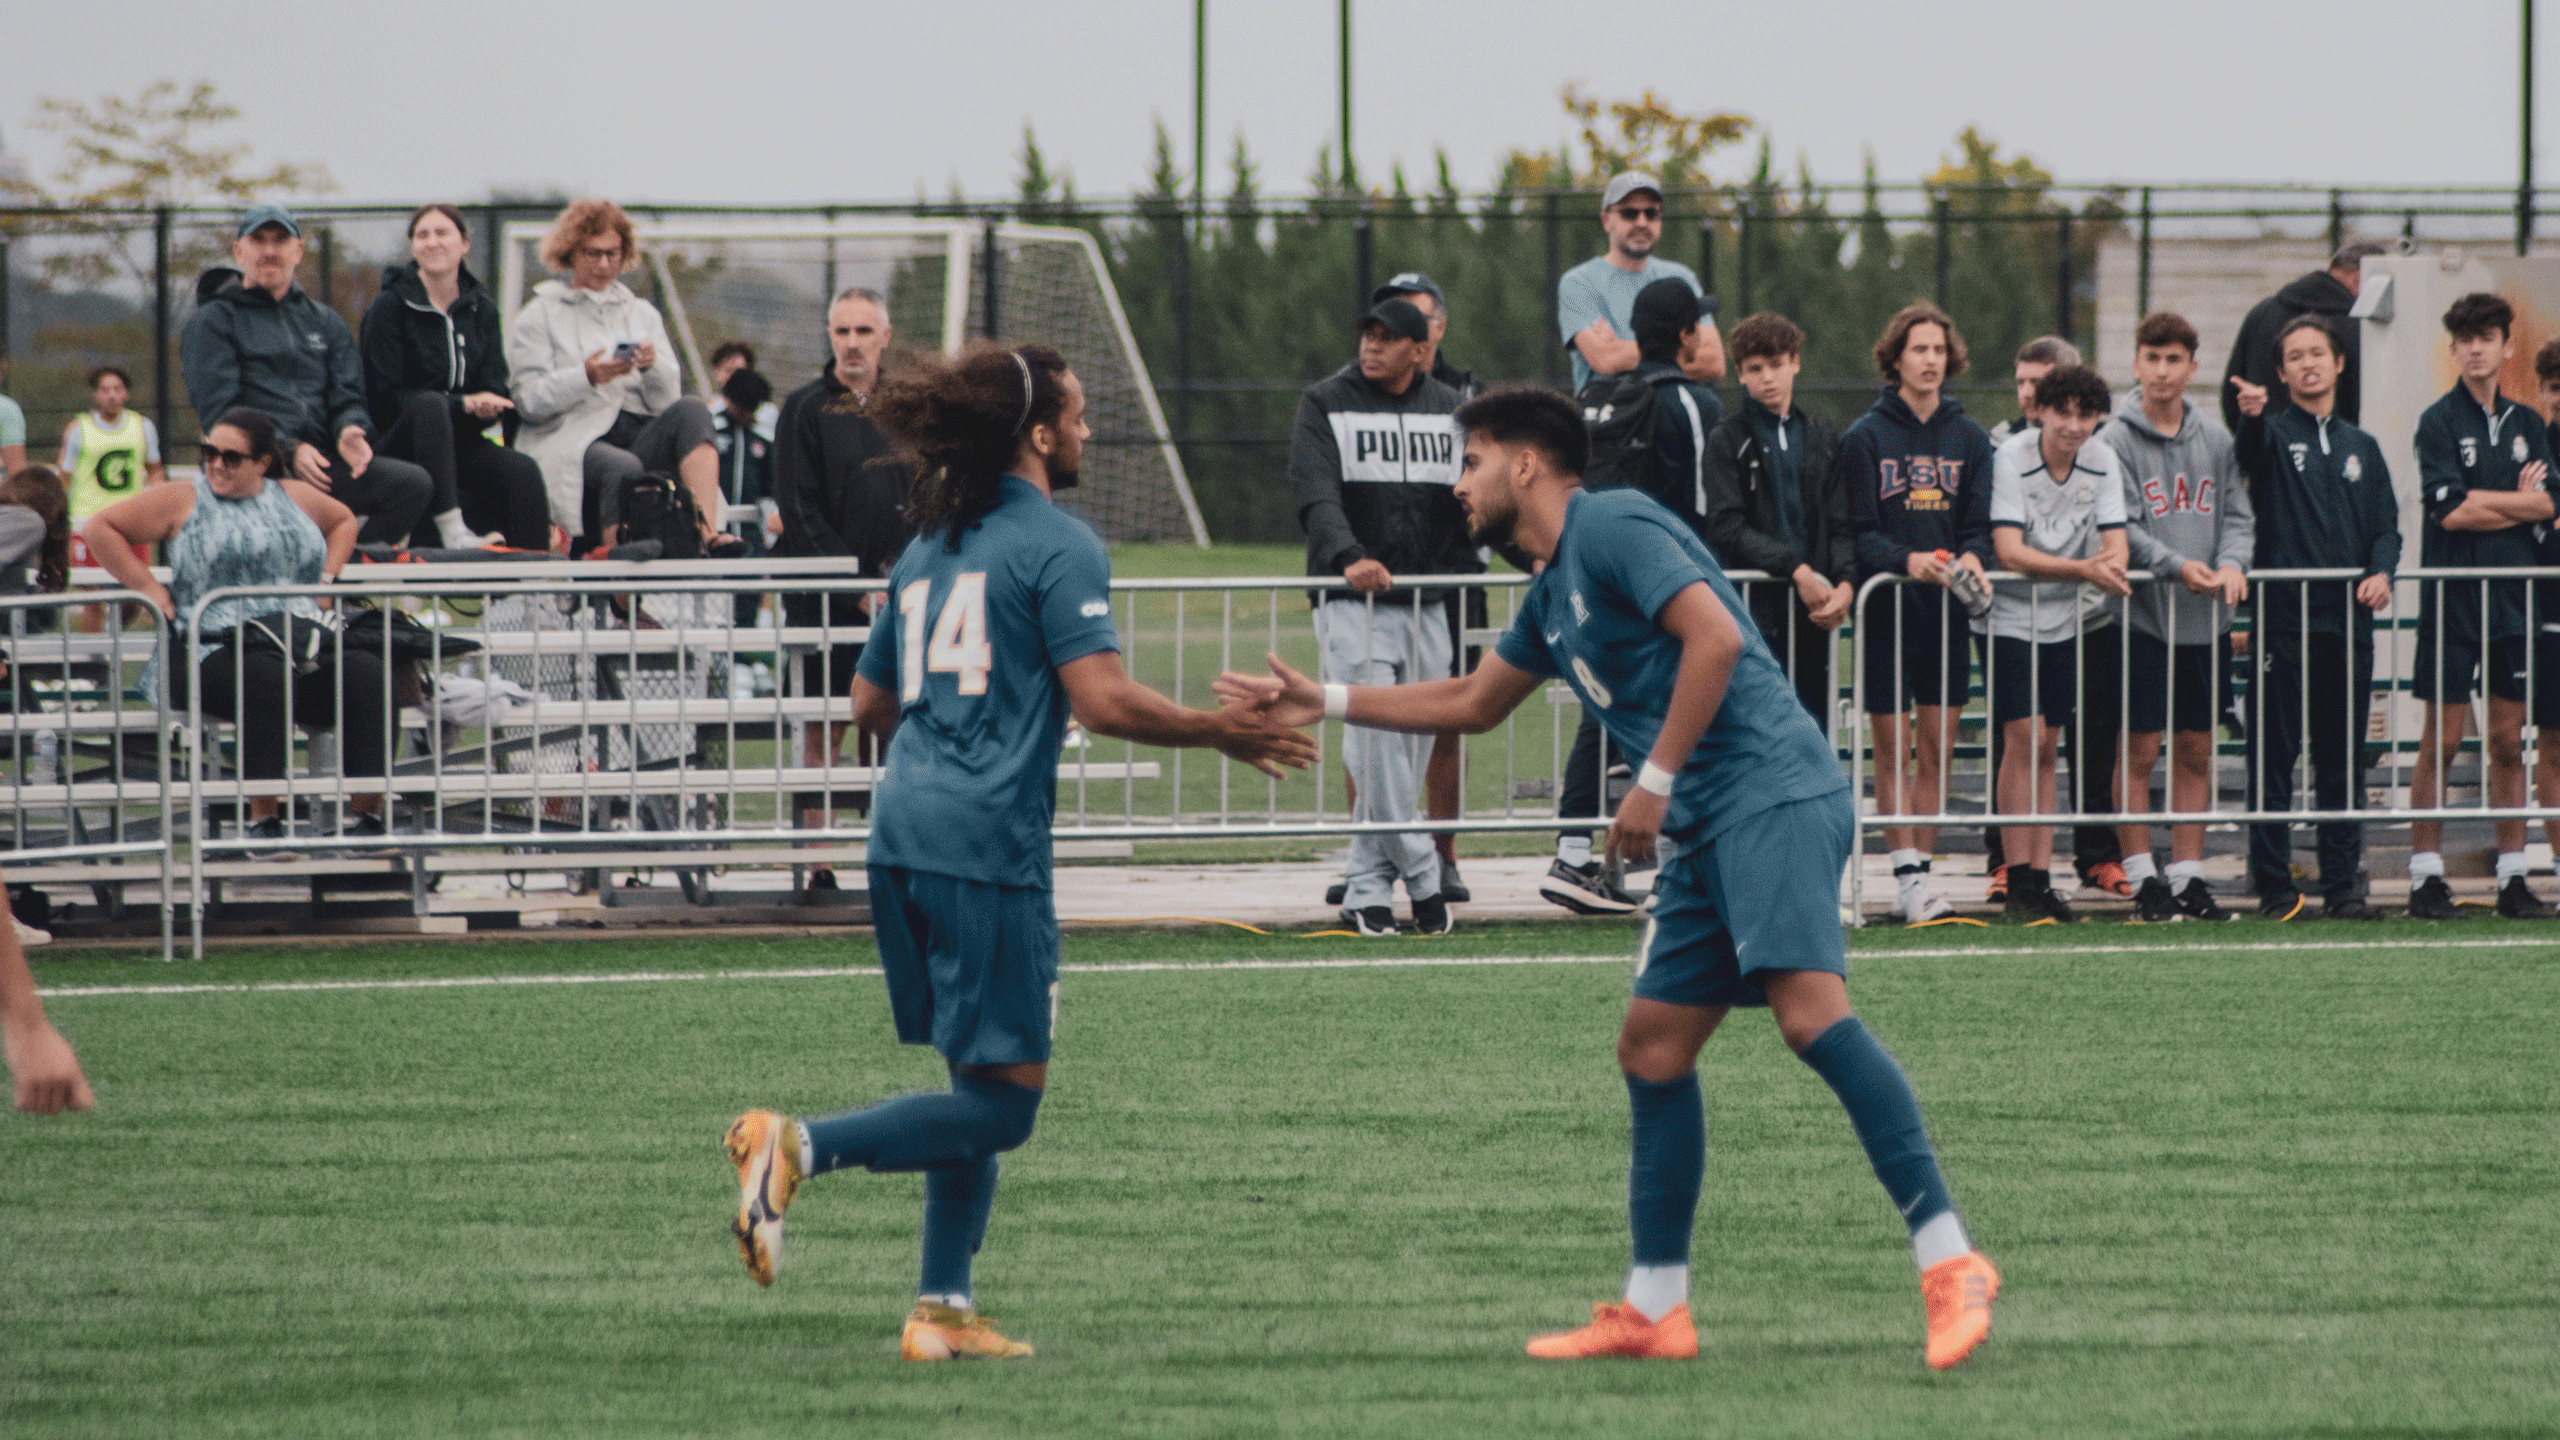 A pair of soccer players in blue jerseys shake hands